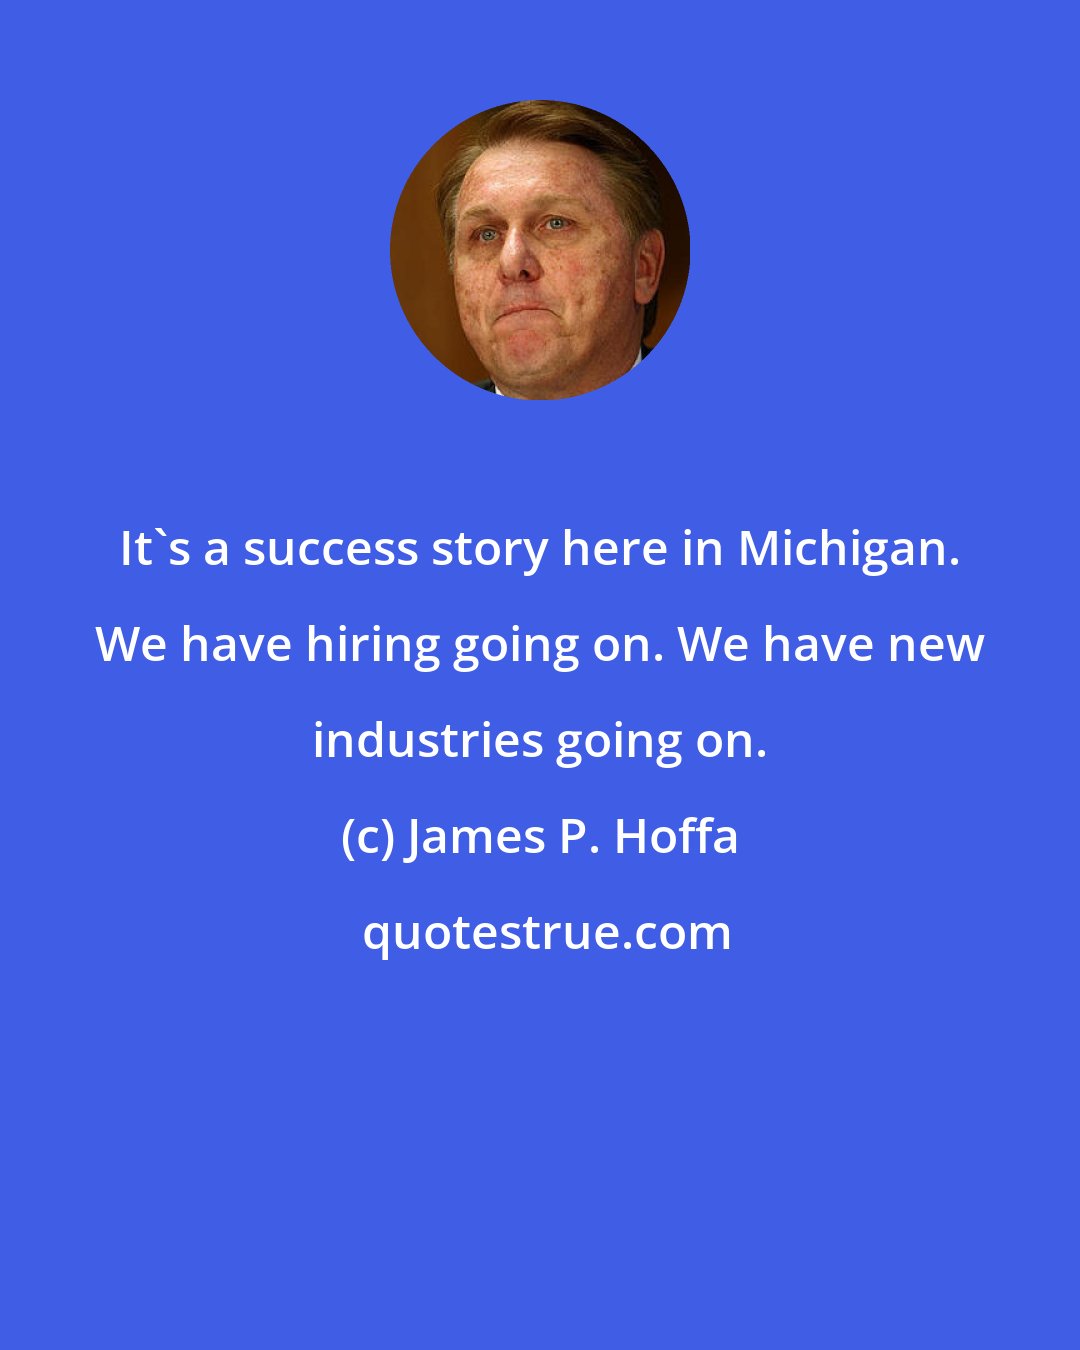 James P. Hoffa: It's a success story here in Michigan. We have hiring going on. We have new industries going on.